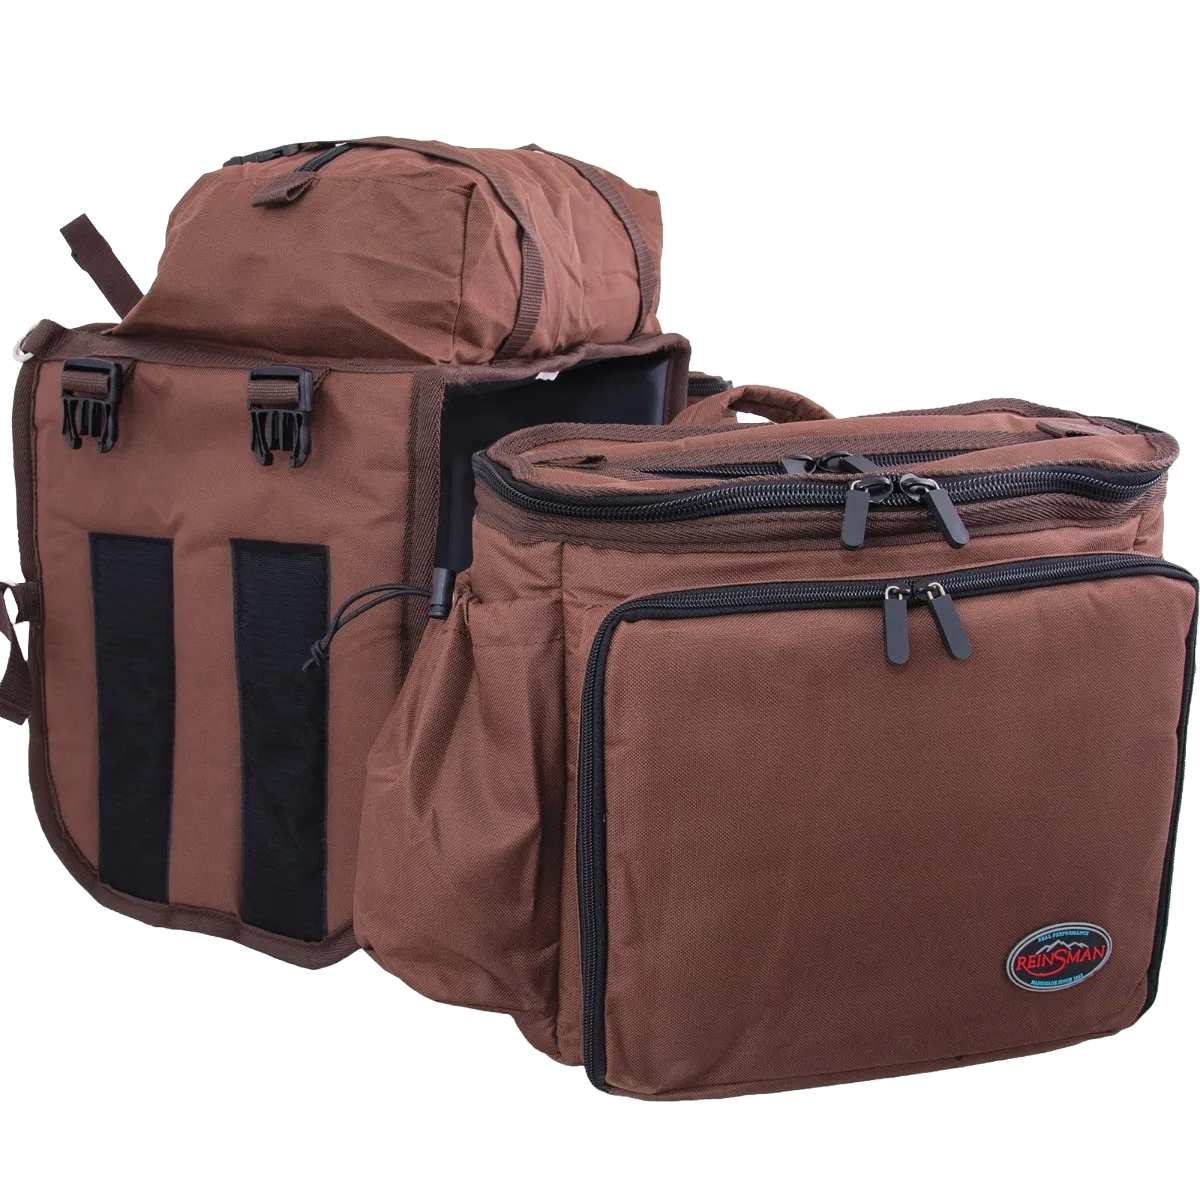 Reinsman Deluxe Insulated Cooler Saddle Bag Brown